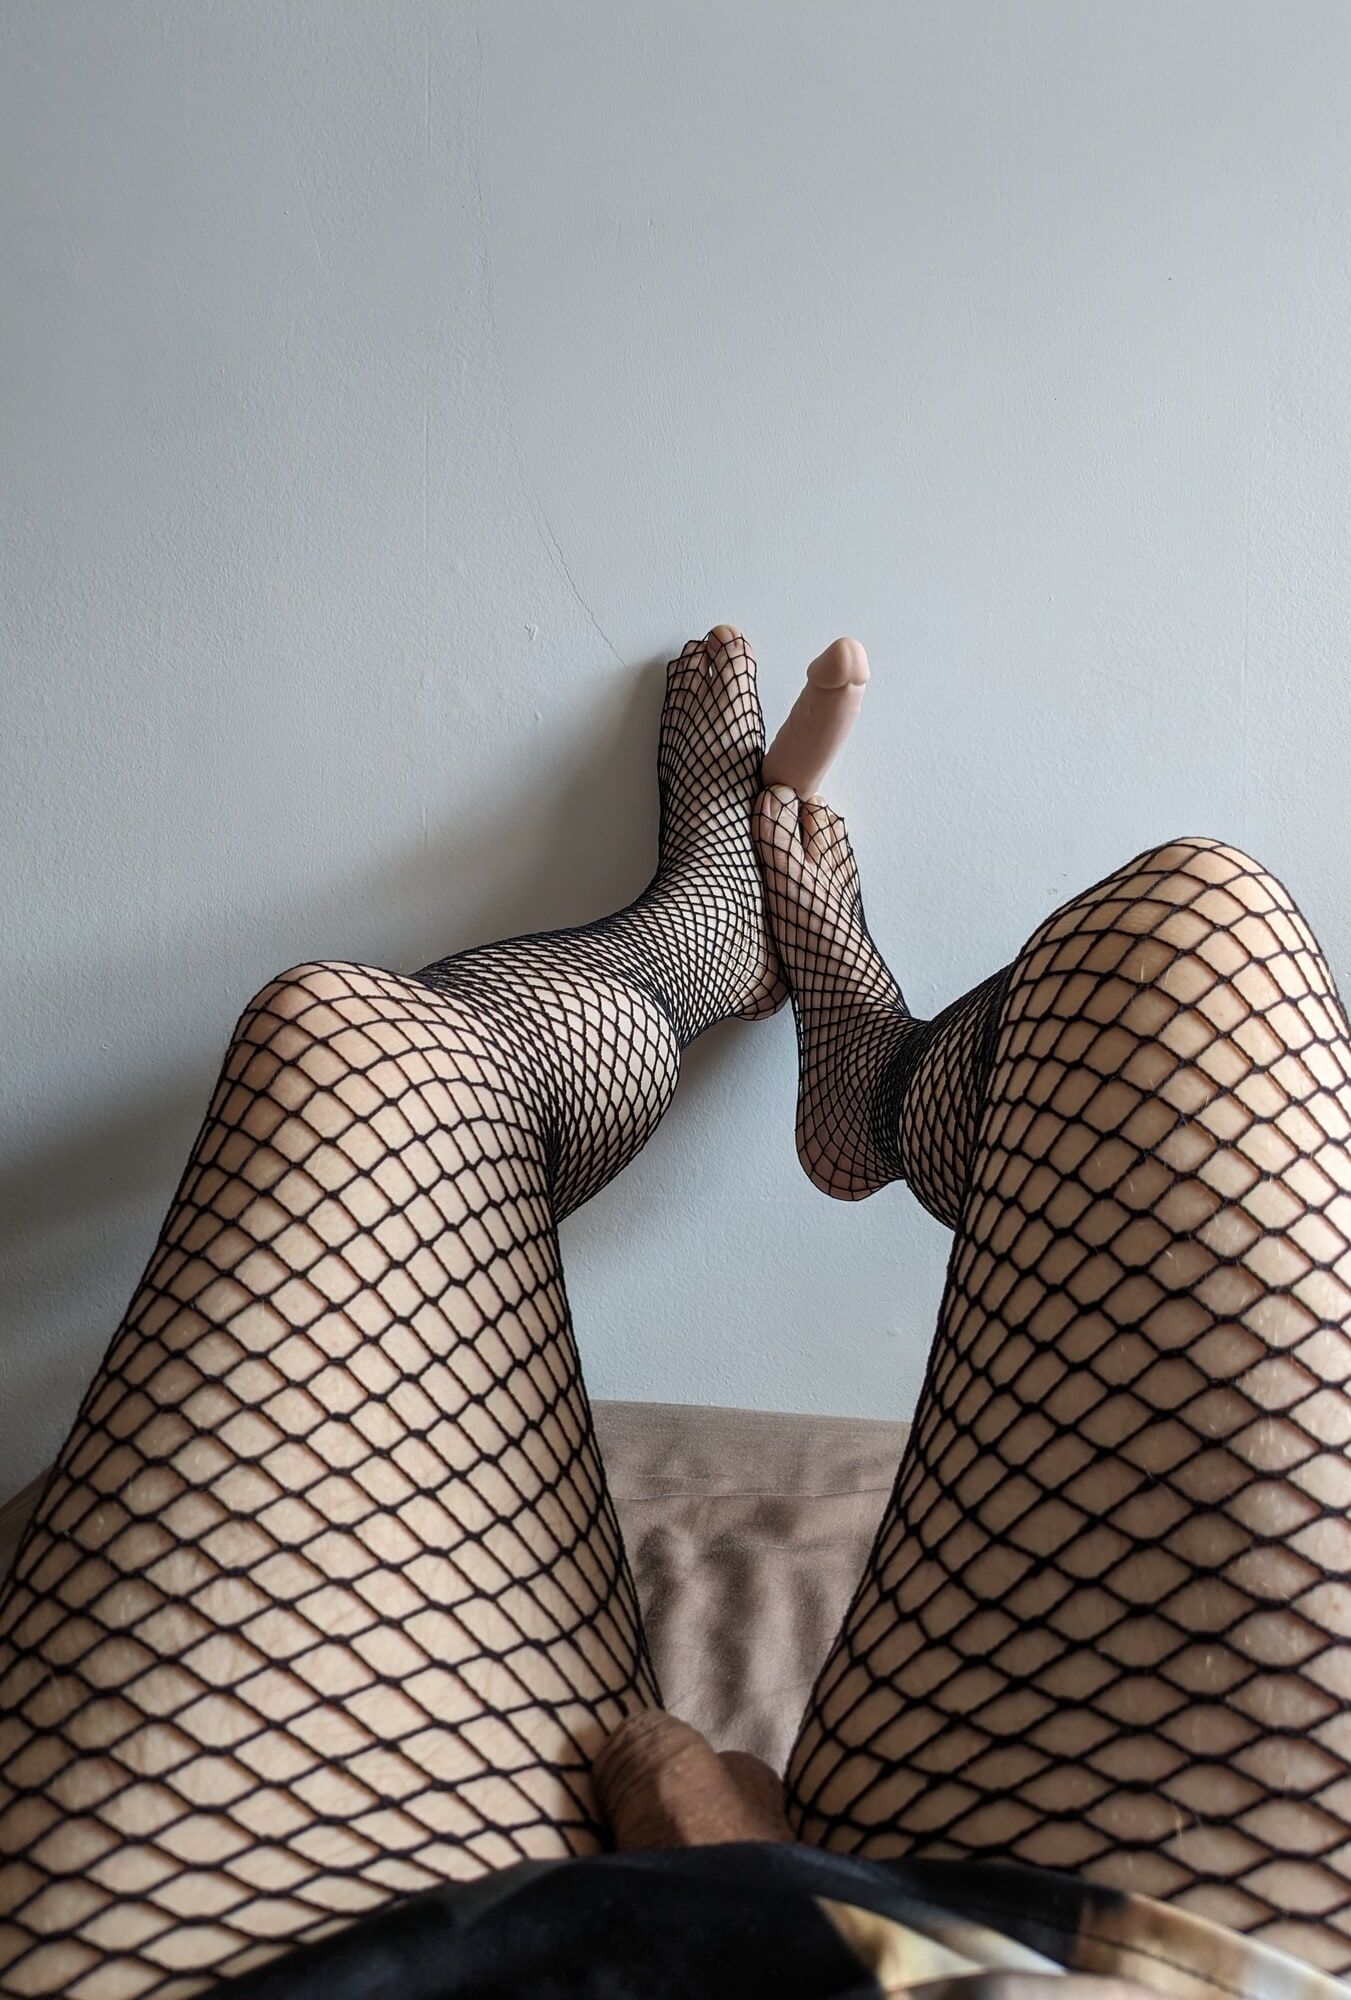 My tiny cock , fishnet and my feet on my dildo  #2